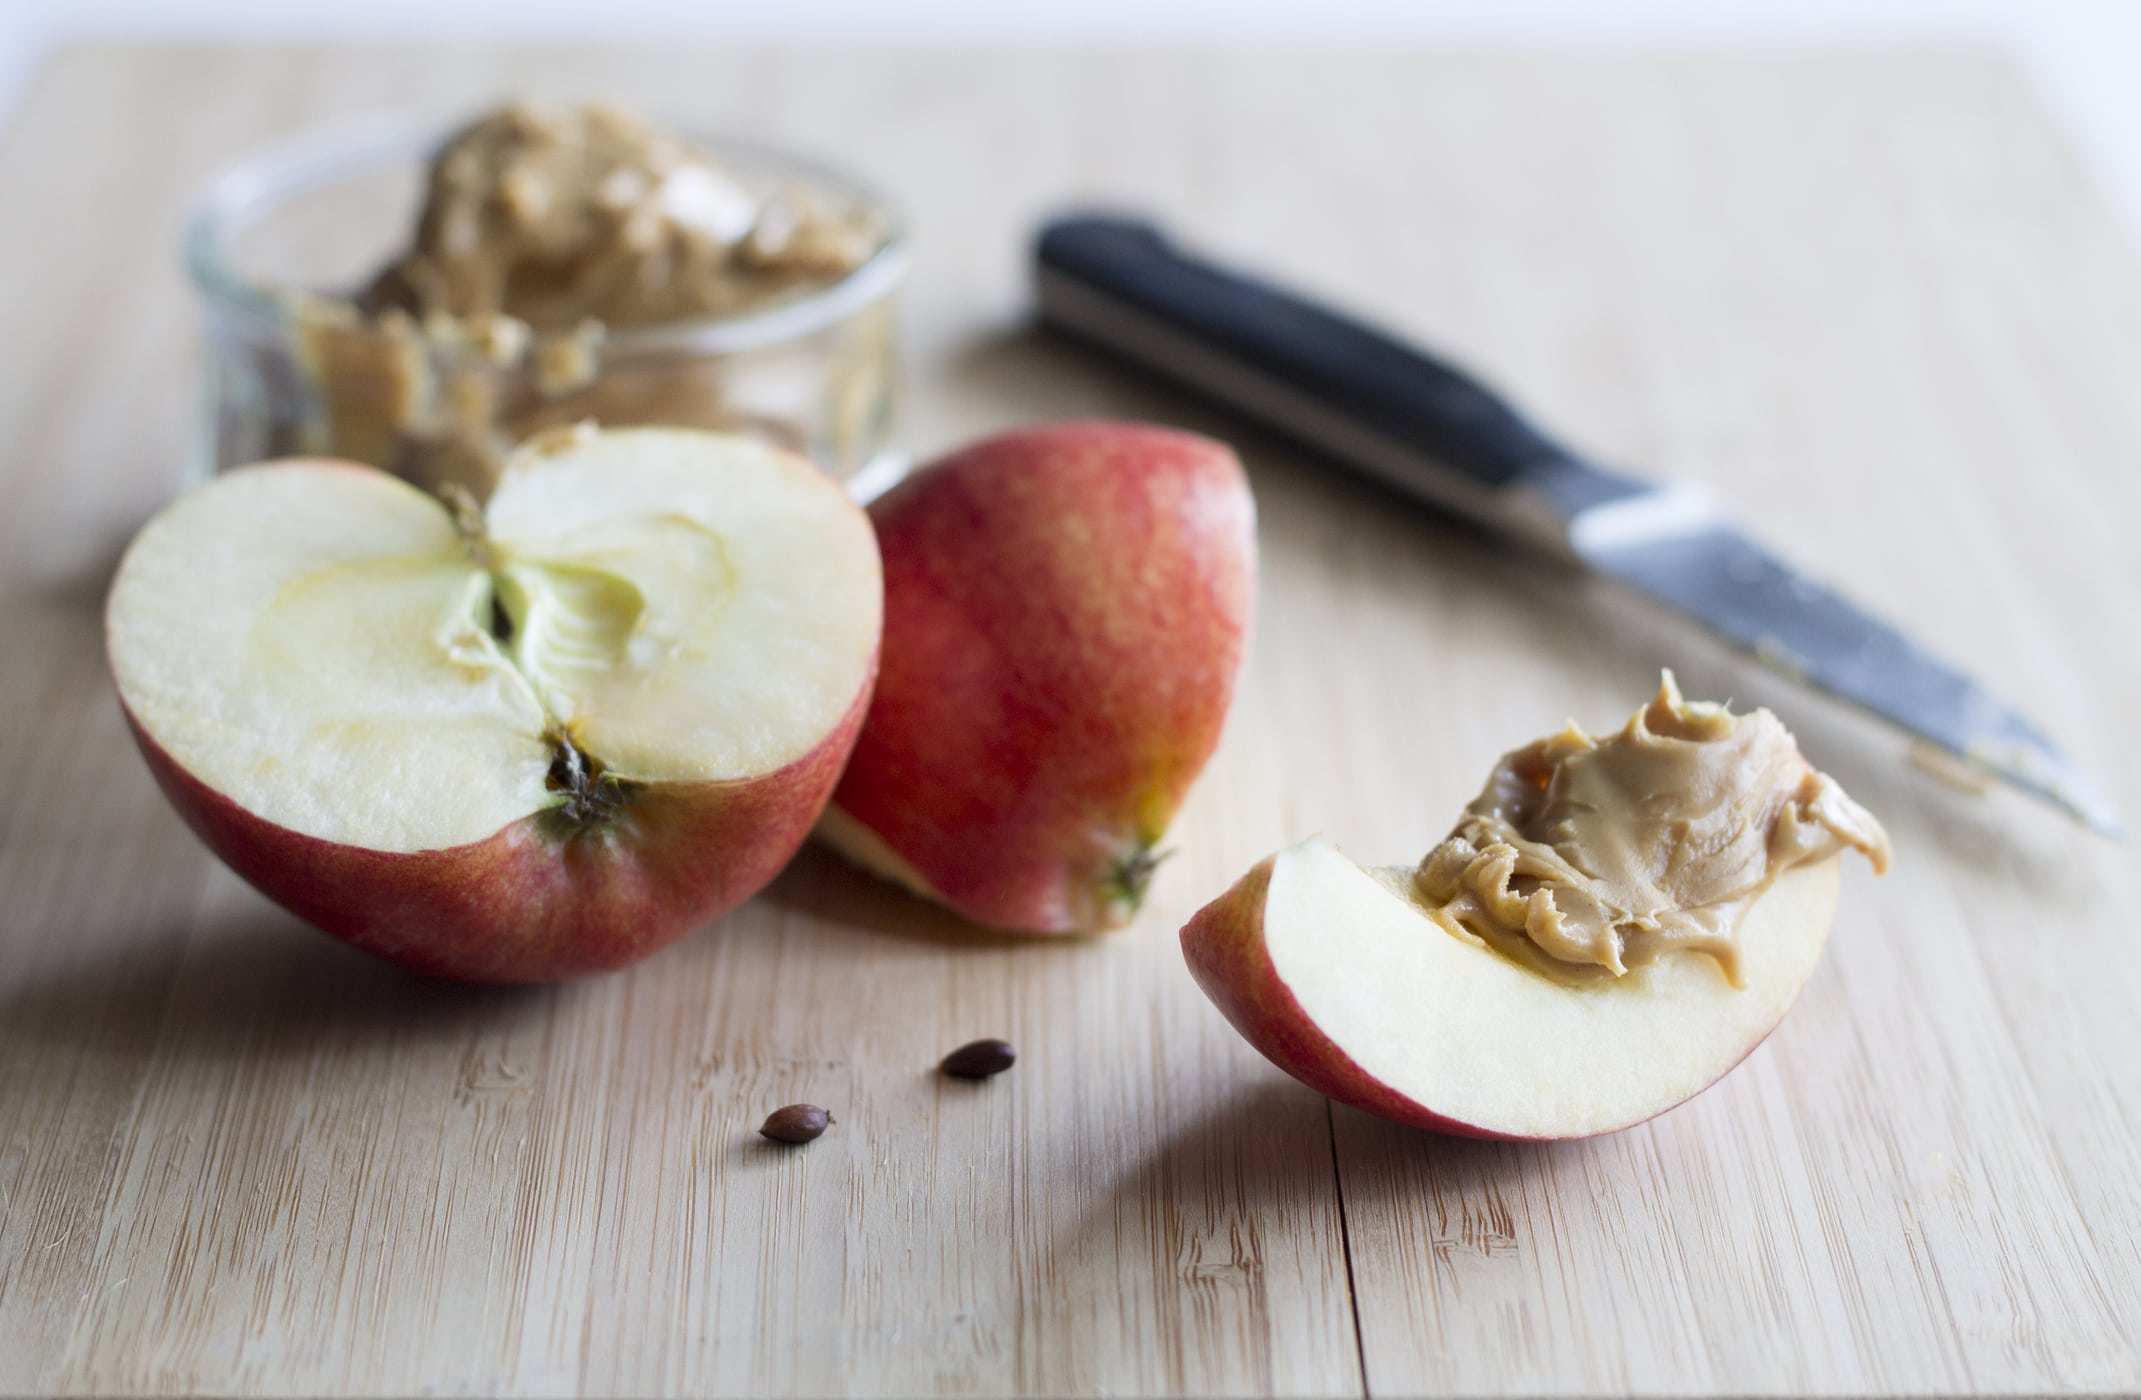 a crisp slice of apple and a scoop of creamy peanut butter, ready to be devoured!